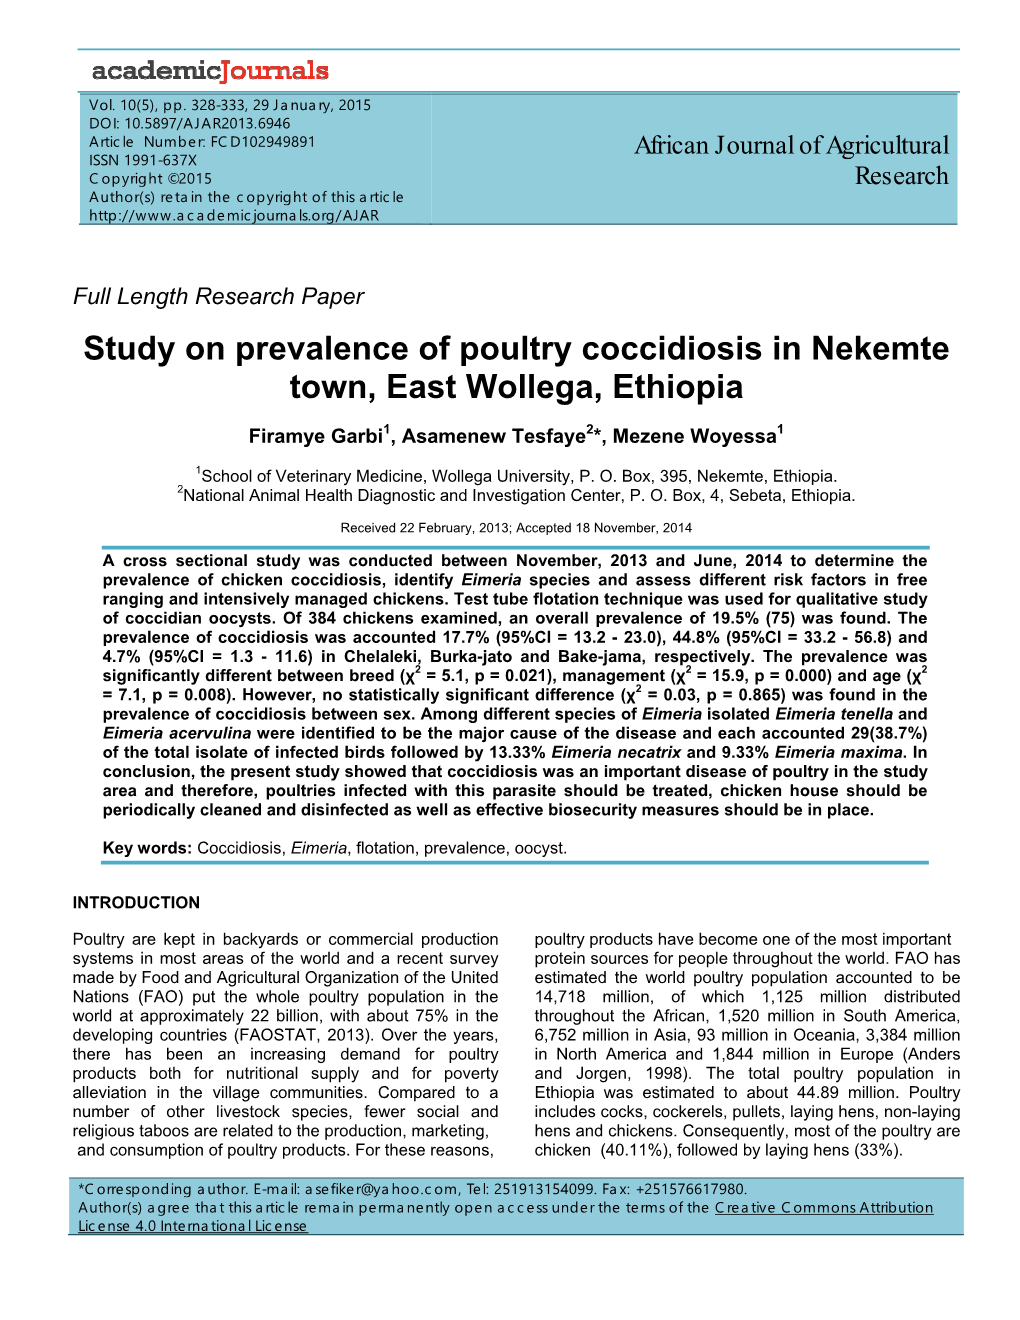 Study on Prevalence of Poultry Coccidiosis in Nekemte Town, East Wollega, Ethiopia